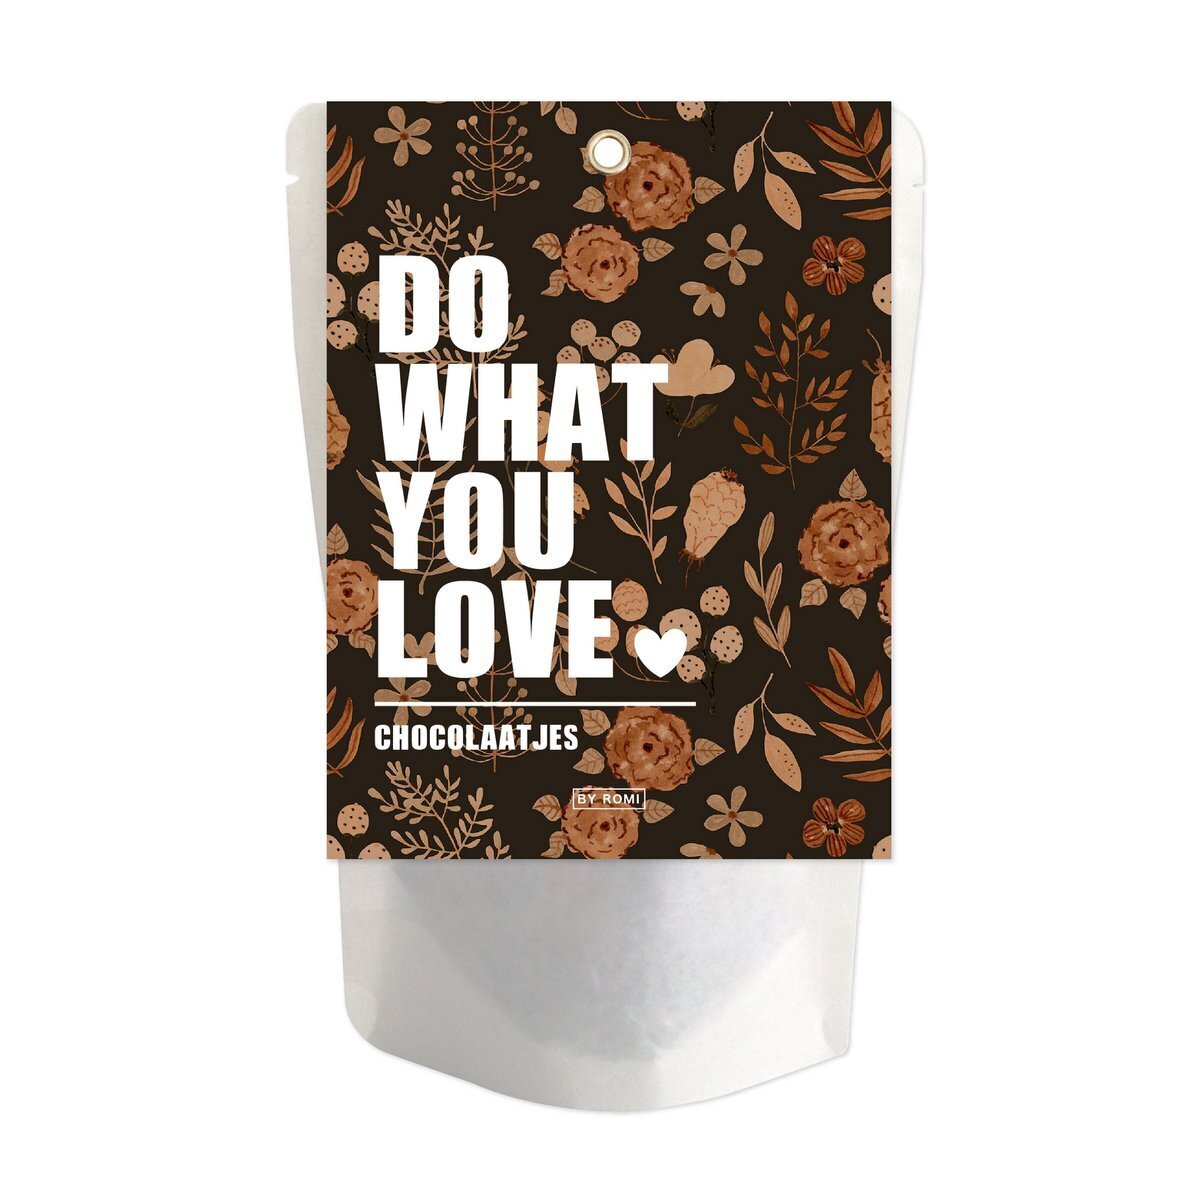 Chocolaatjes / Do what you love